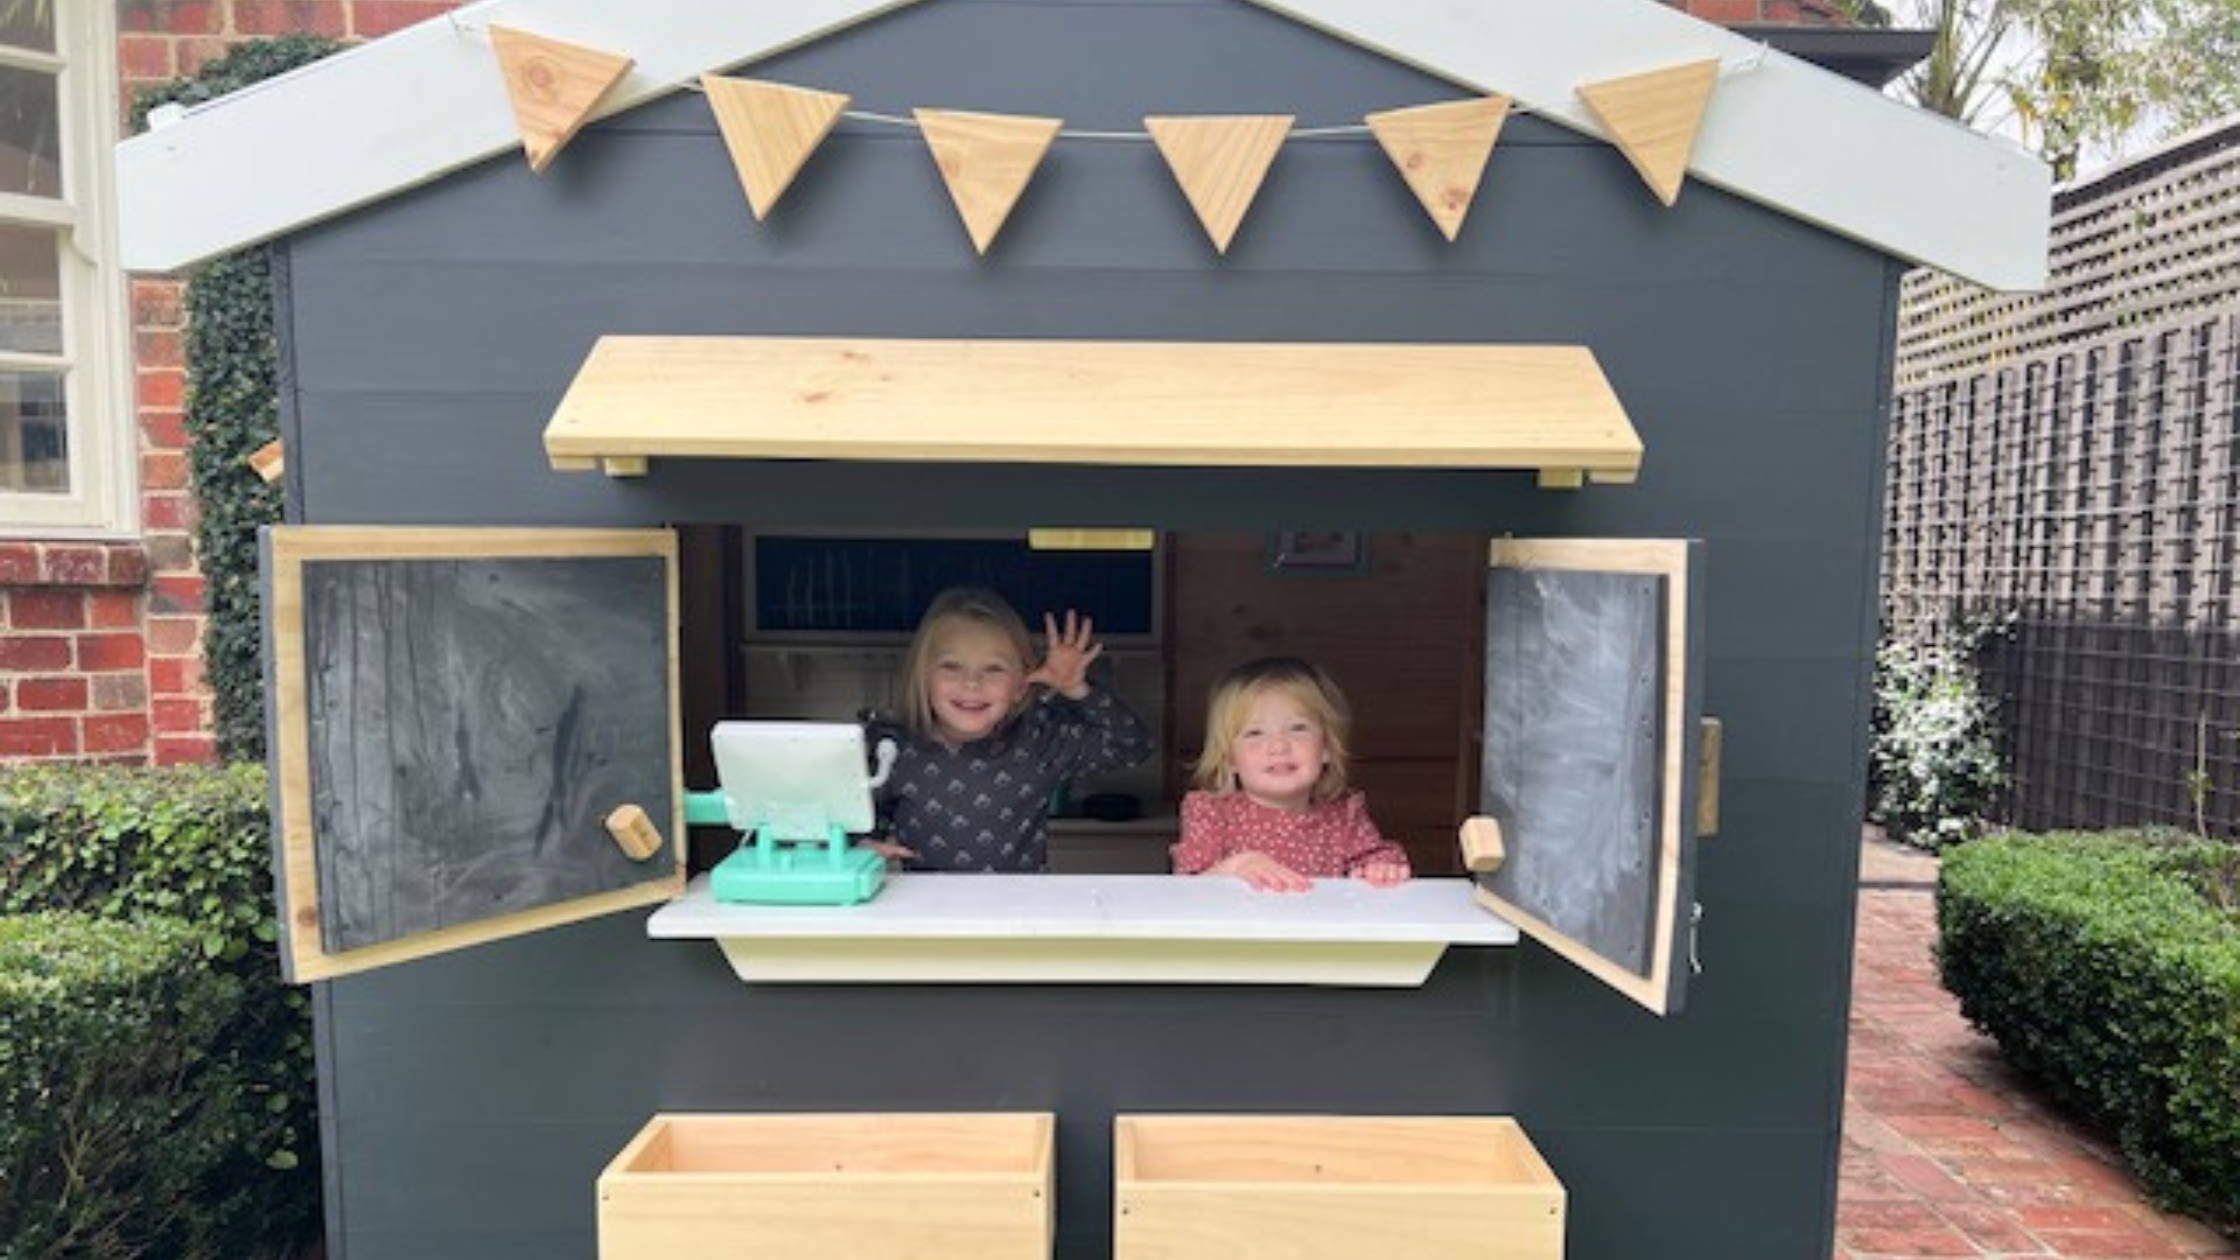 Jack and Carly Riewoldt's kids play in their wooden Cubby House